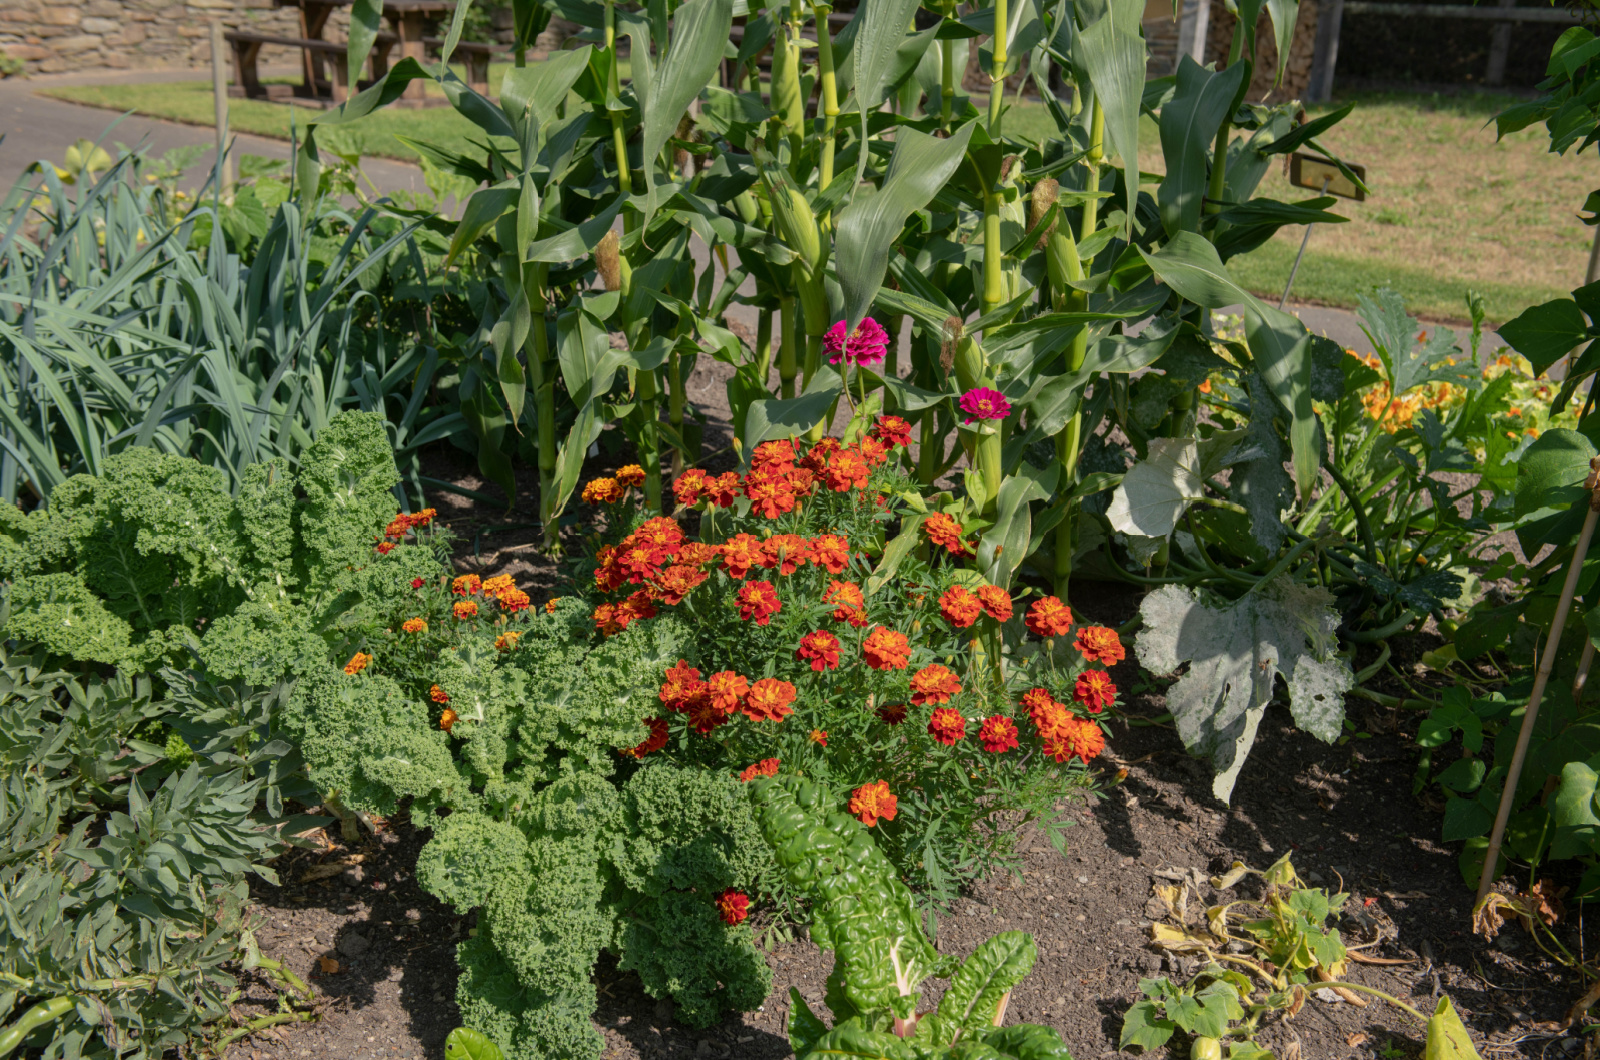 Companion Planting with Marigold Flowers and Vegetables